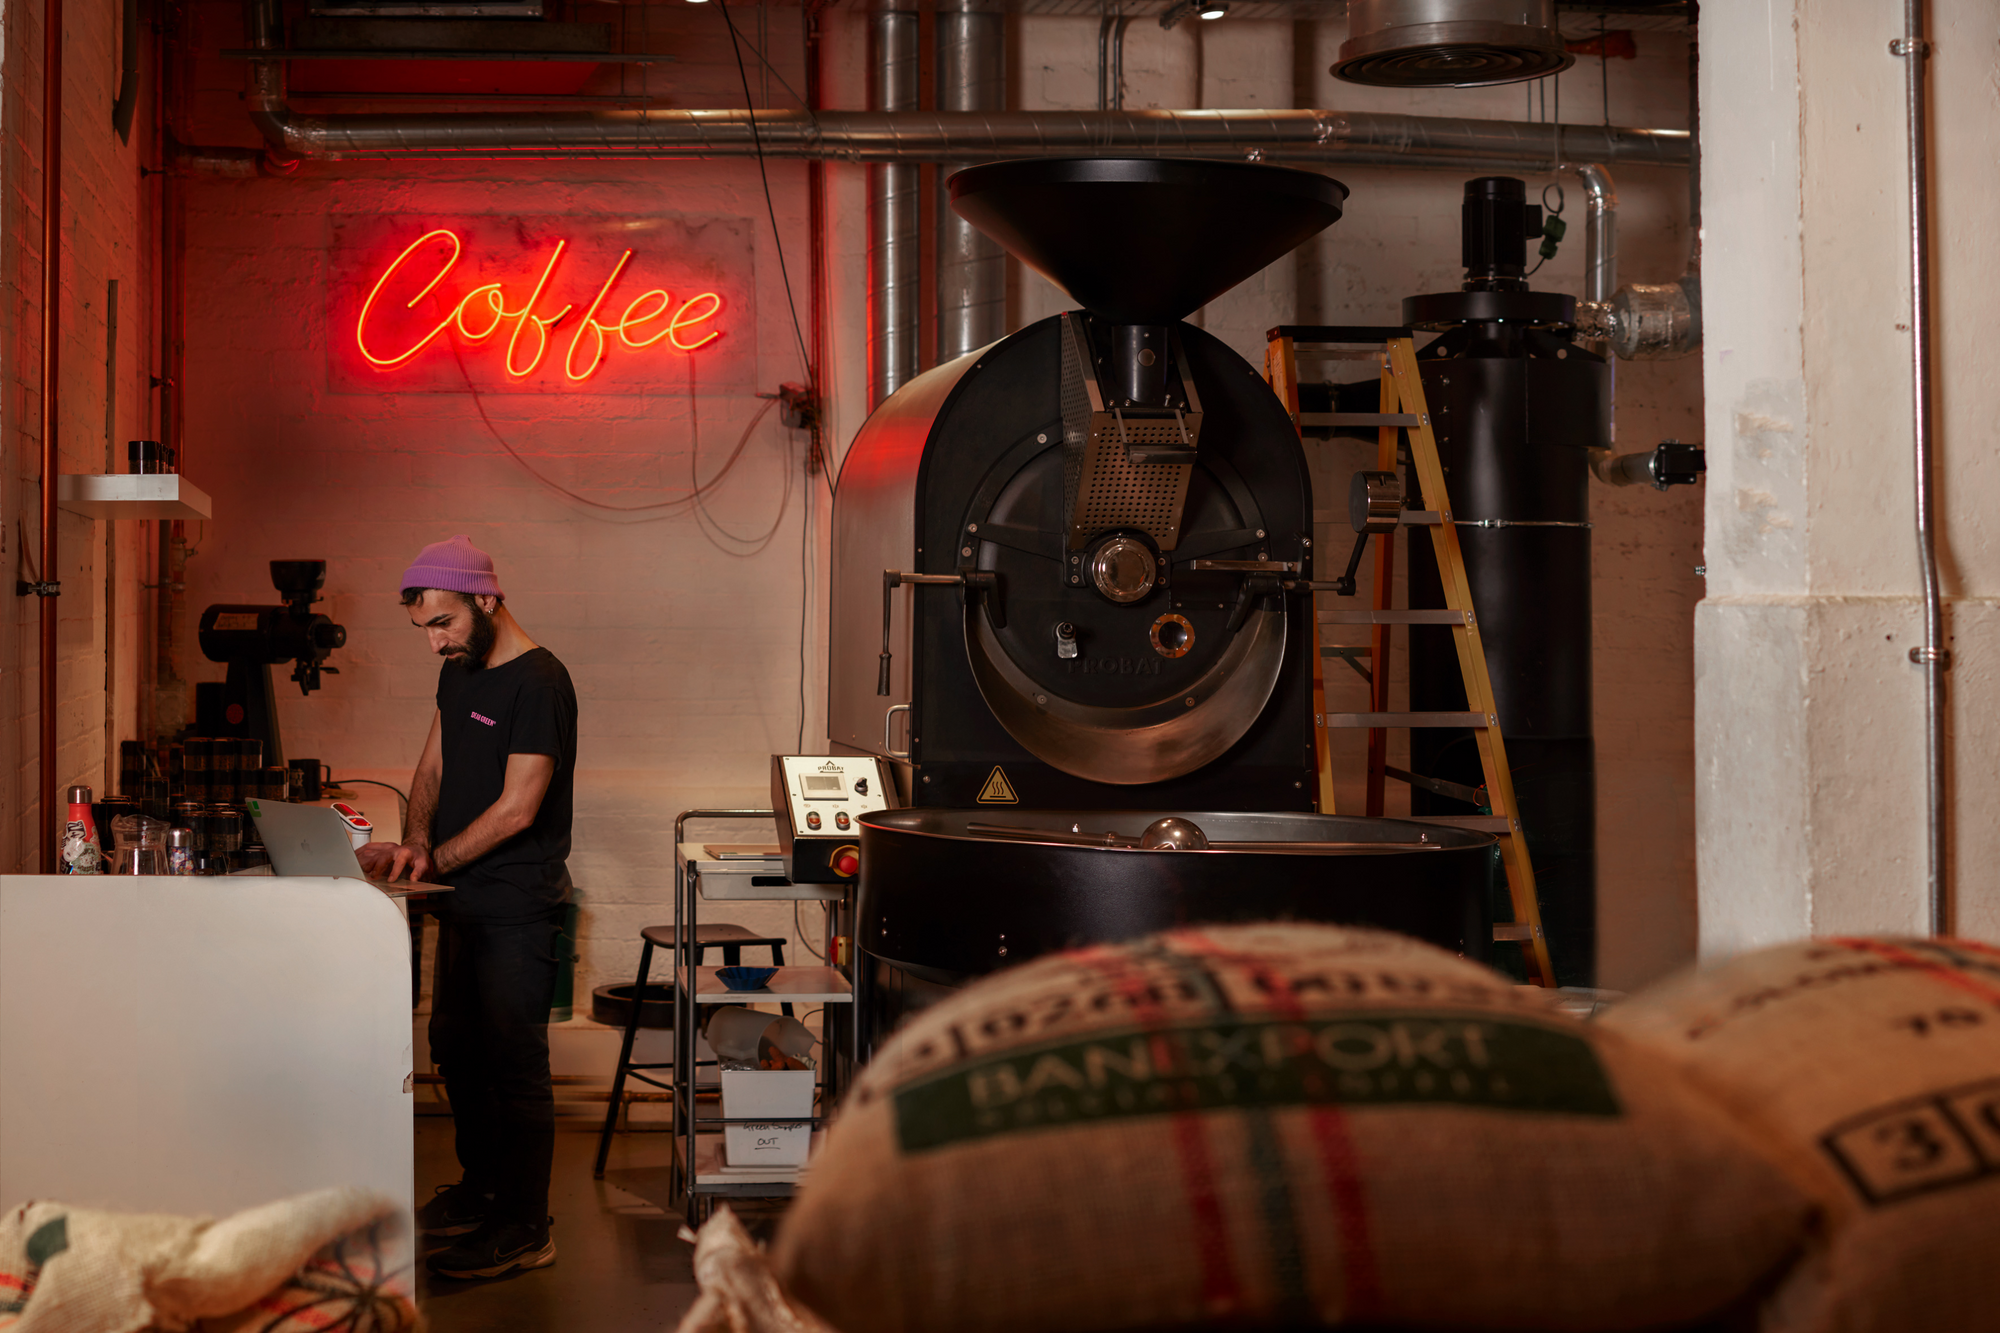 Roastery in action with an illuminated "coffee" sign and coffee roaster standing in the roasting area with bags of beans in the foreground. The staff member is wearing black with a purple beanie and is deep in concentration.